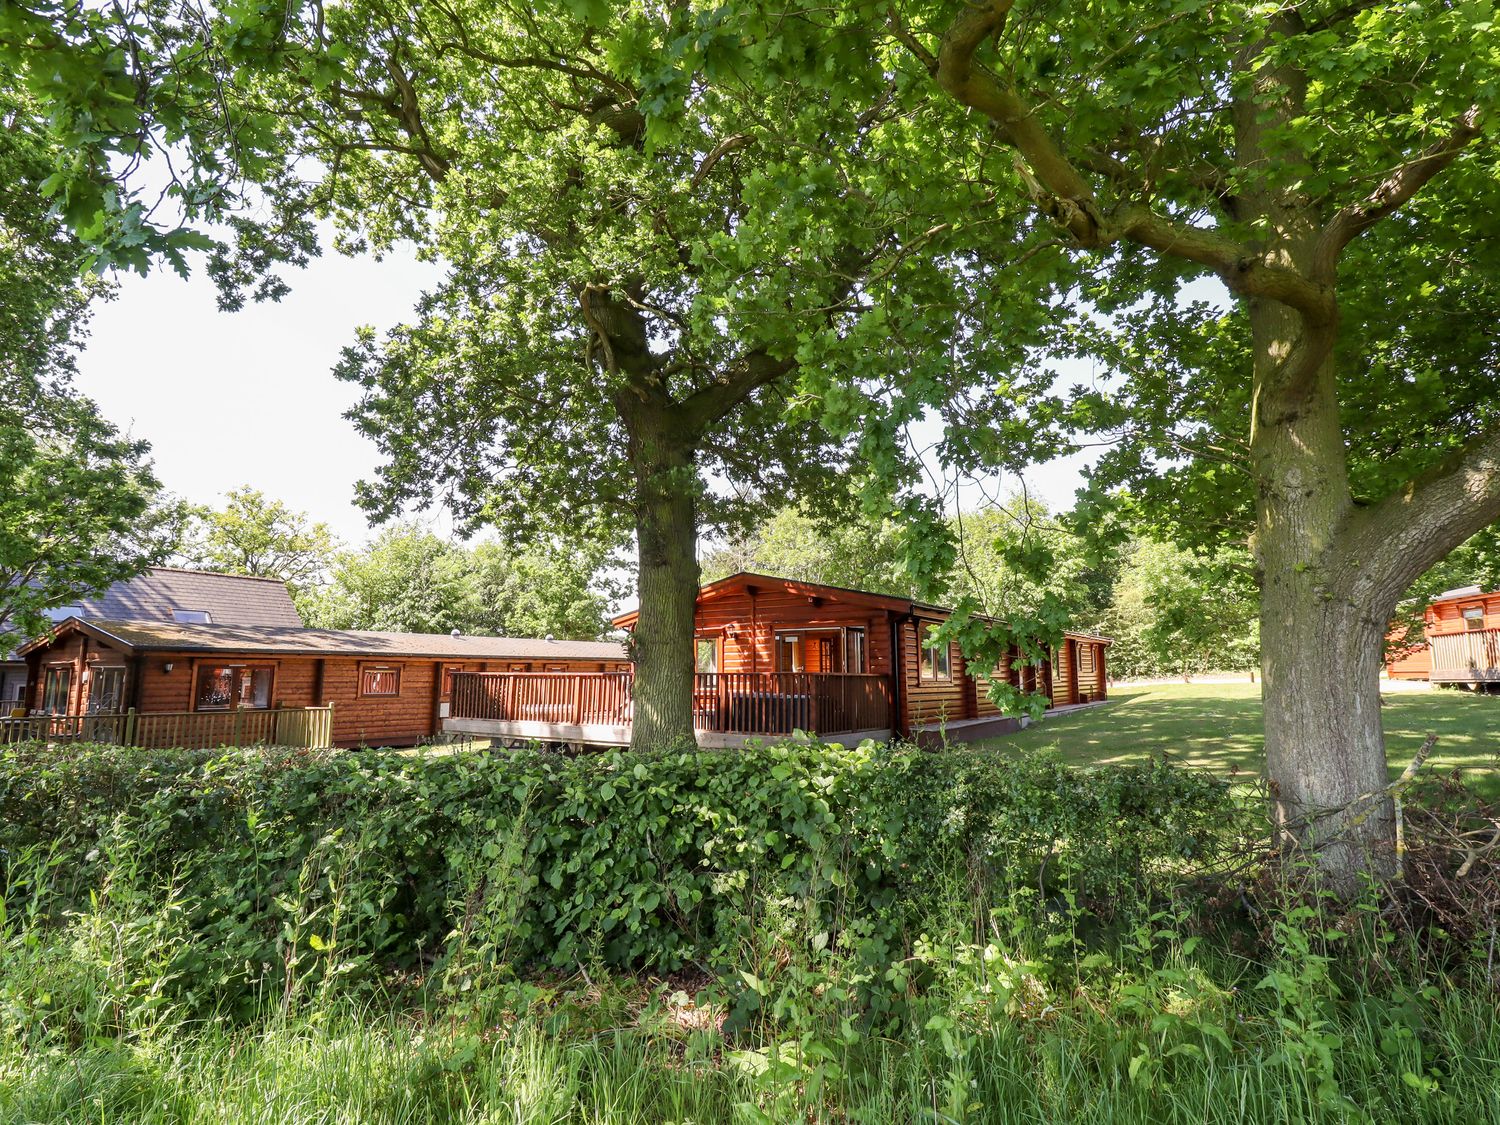 The Fairways is near Louth, in Lincolnshire. Four-bedroom lodge enjoying countryside views, in AONB.